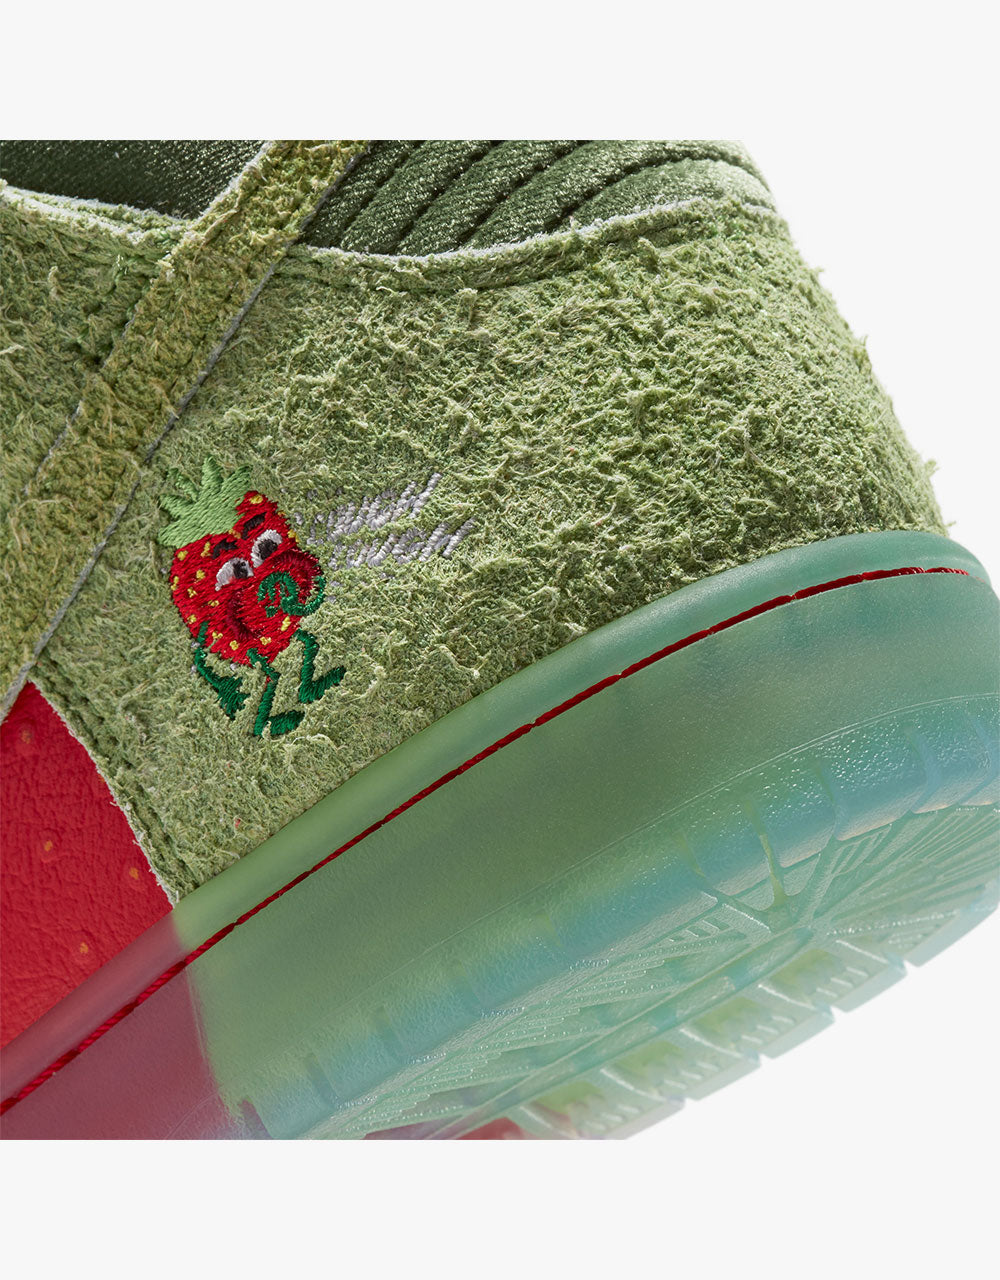 Nike SB 'Strawberry Cough' Dunk High - University Red/Spinach Green-Magic Ember